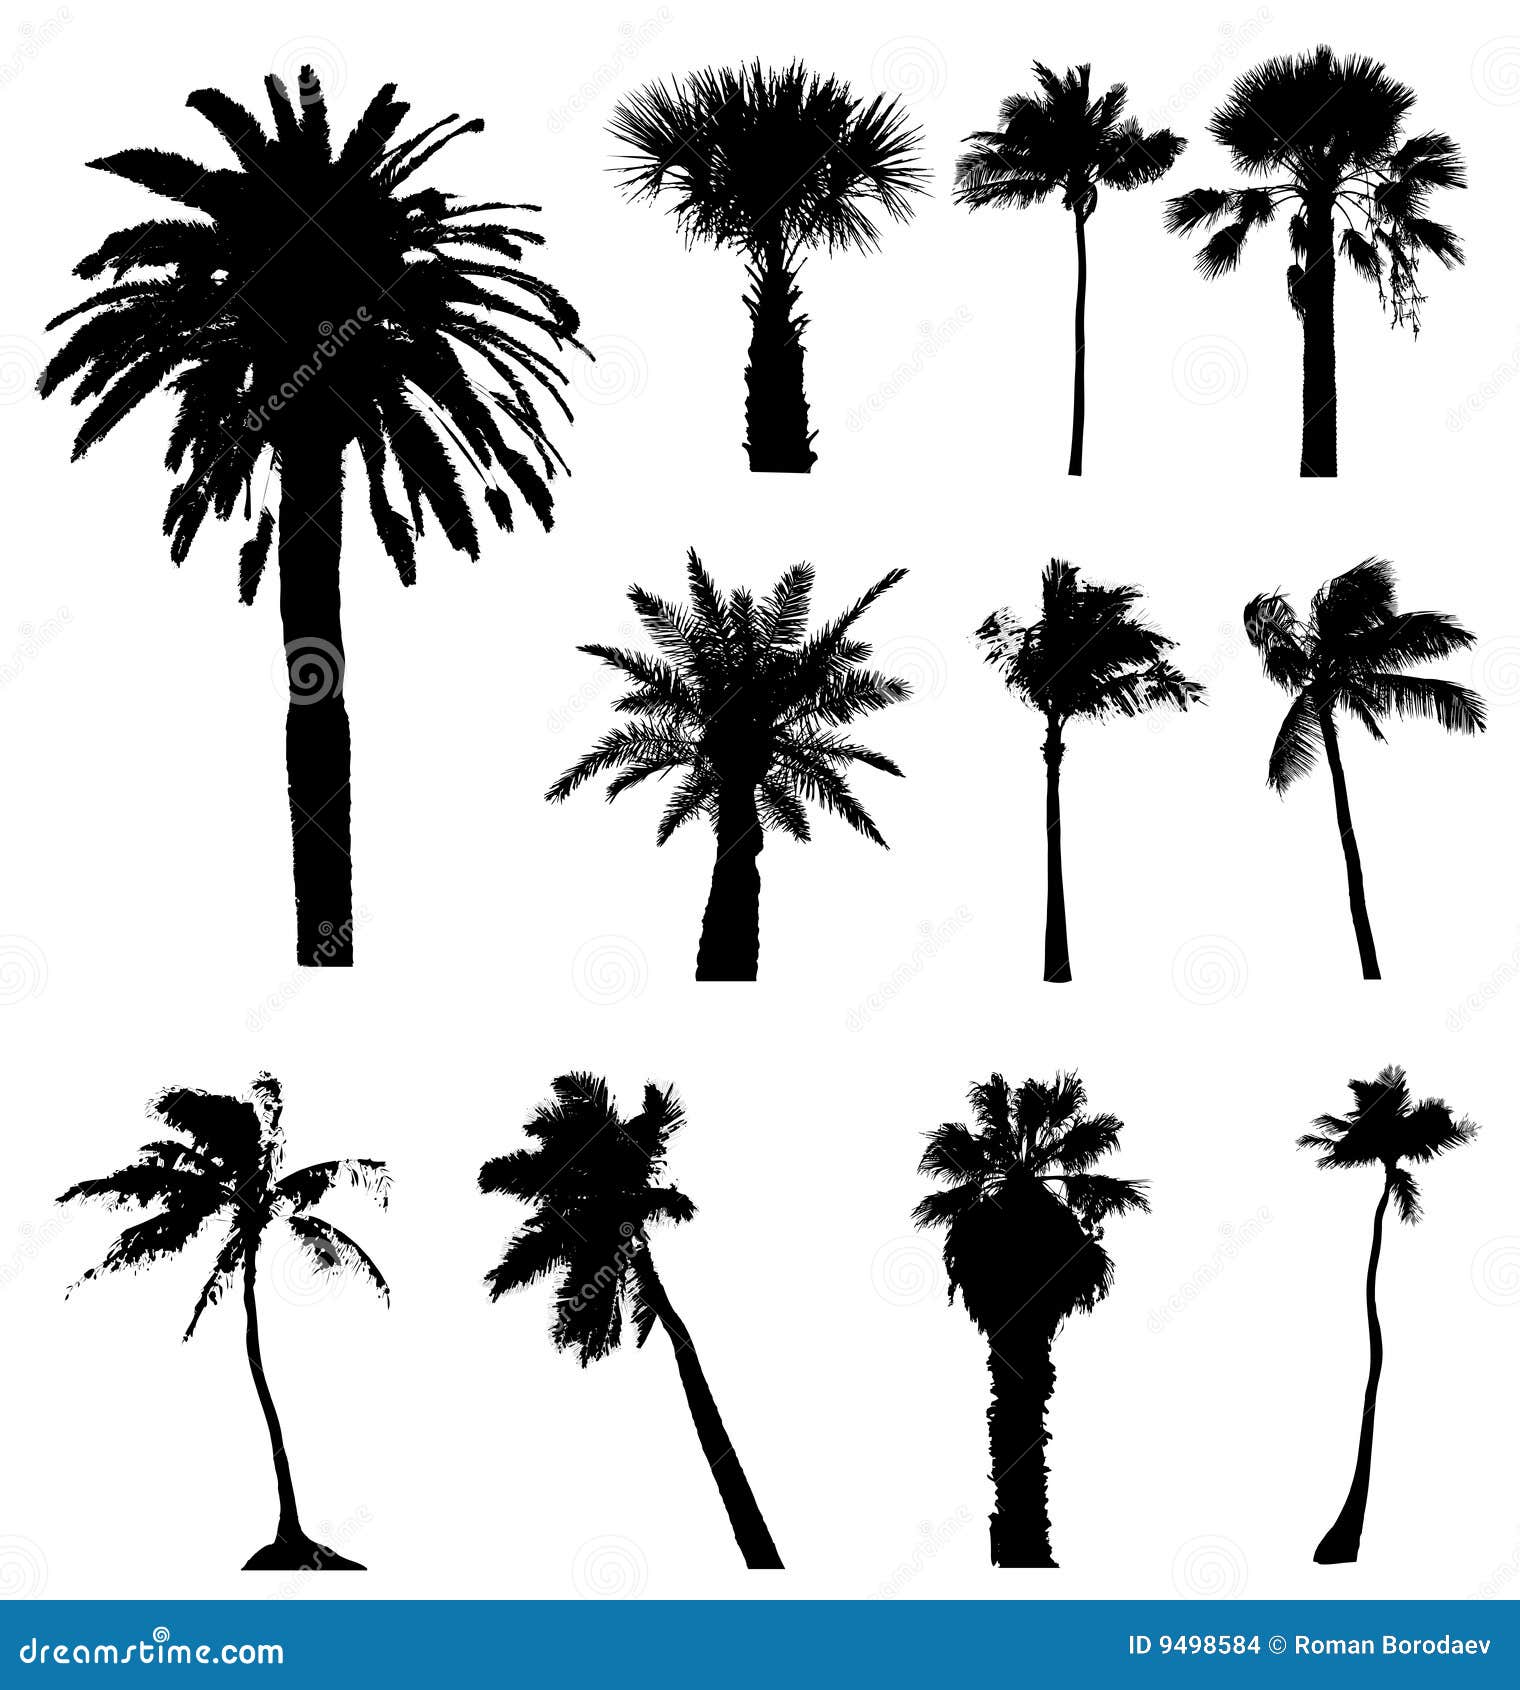  palm trees silhouettes  on white background, palms tree palmtree palmtrees silhouette s tropical urban leaves